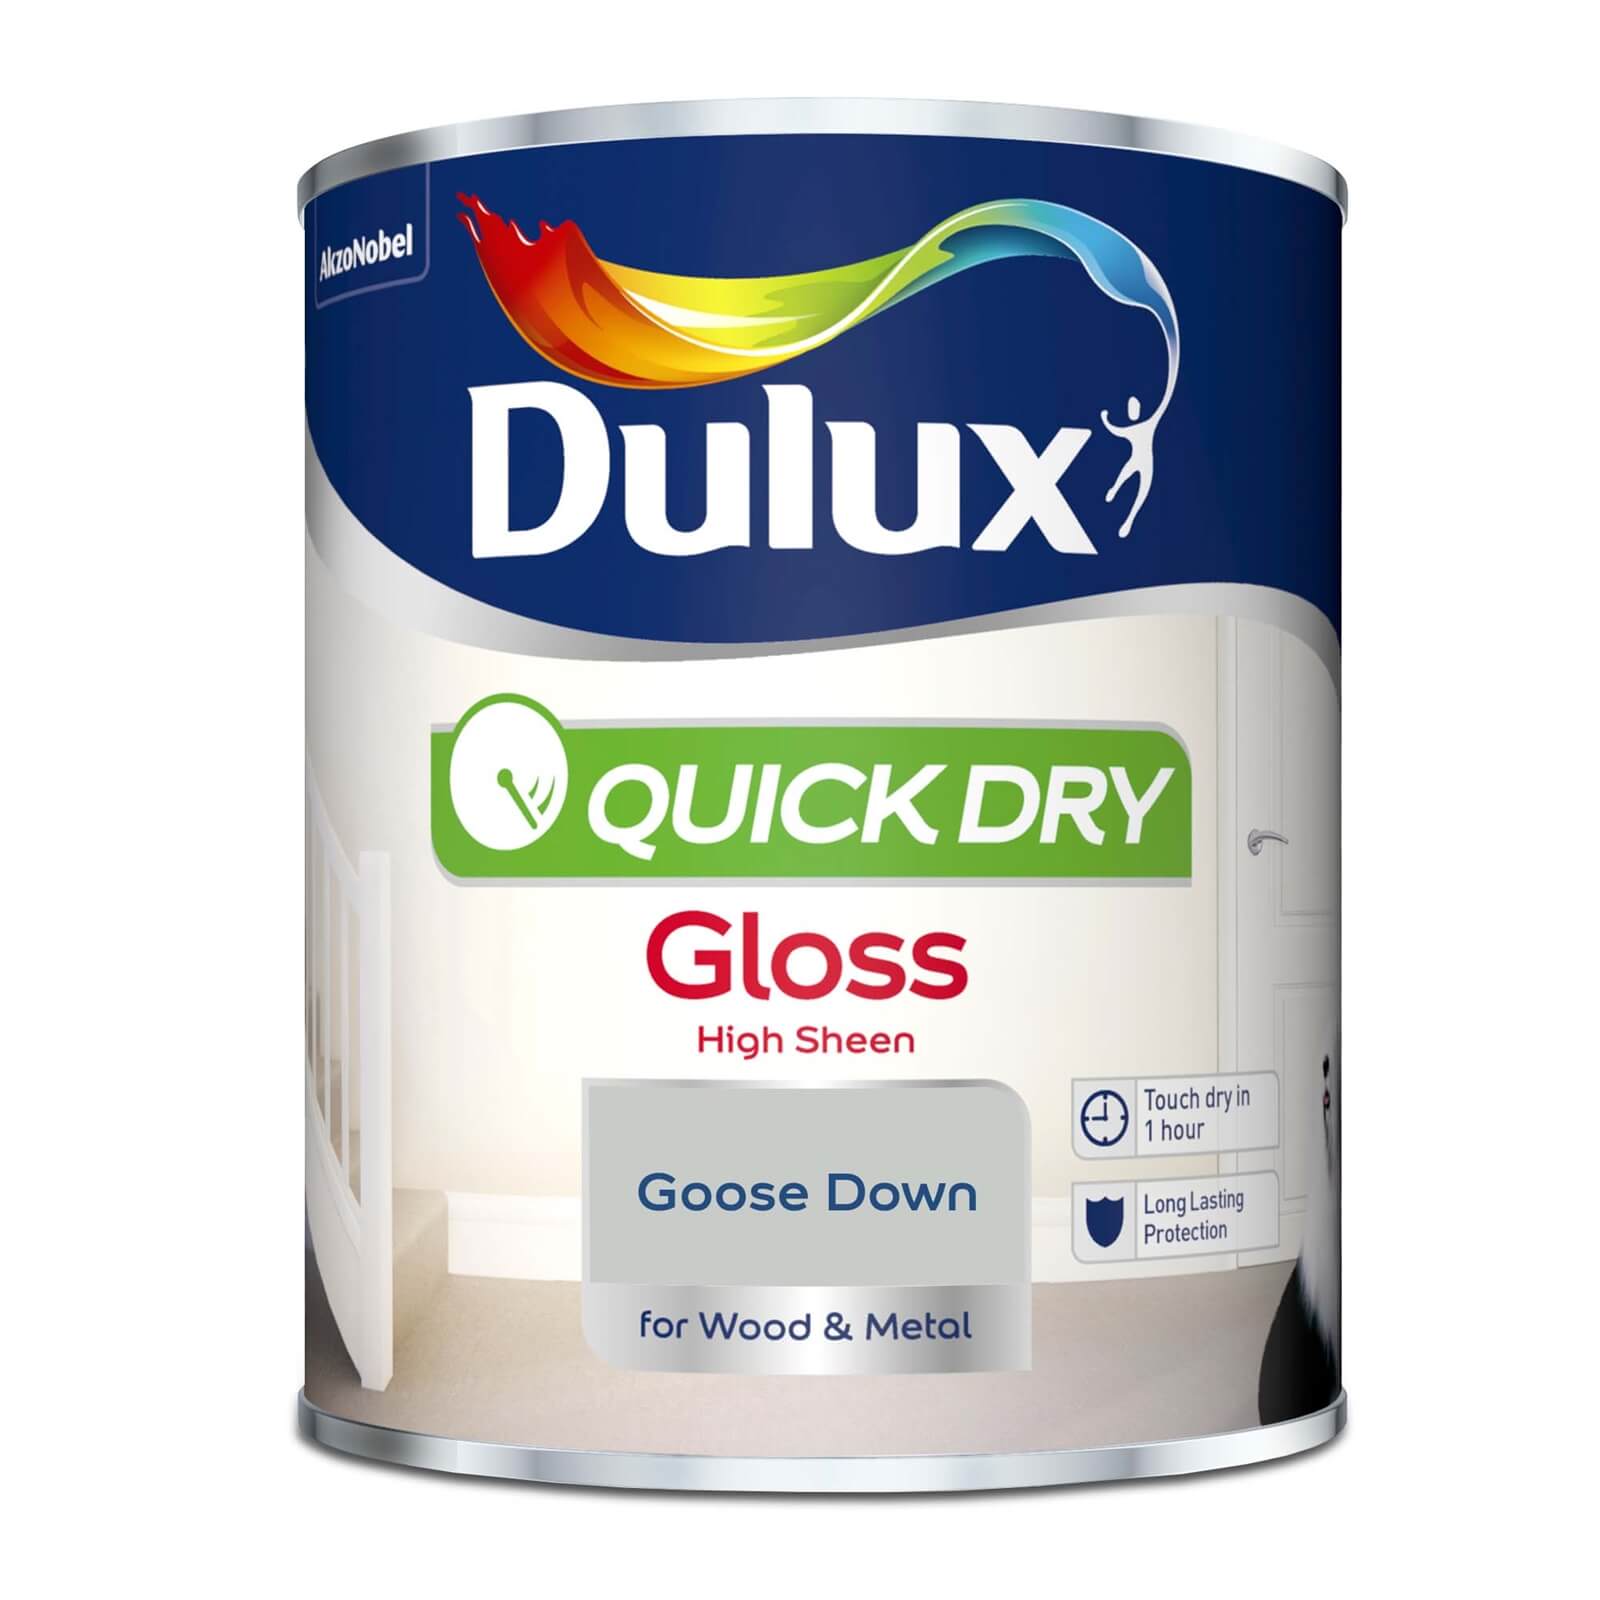 Dulux Quick Dry Gloss Paint Goose Down - 750ml